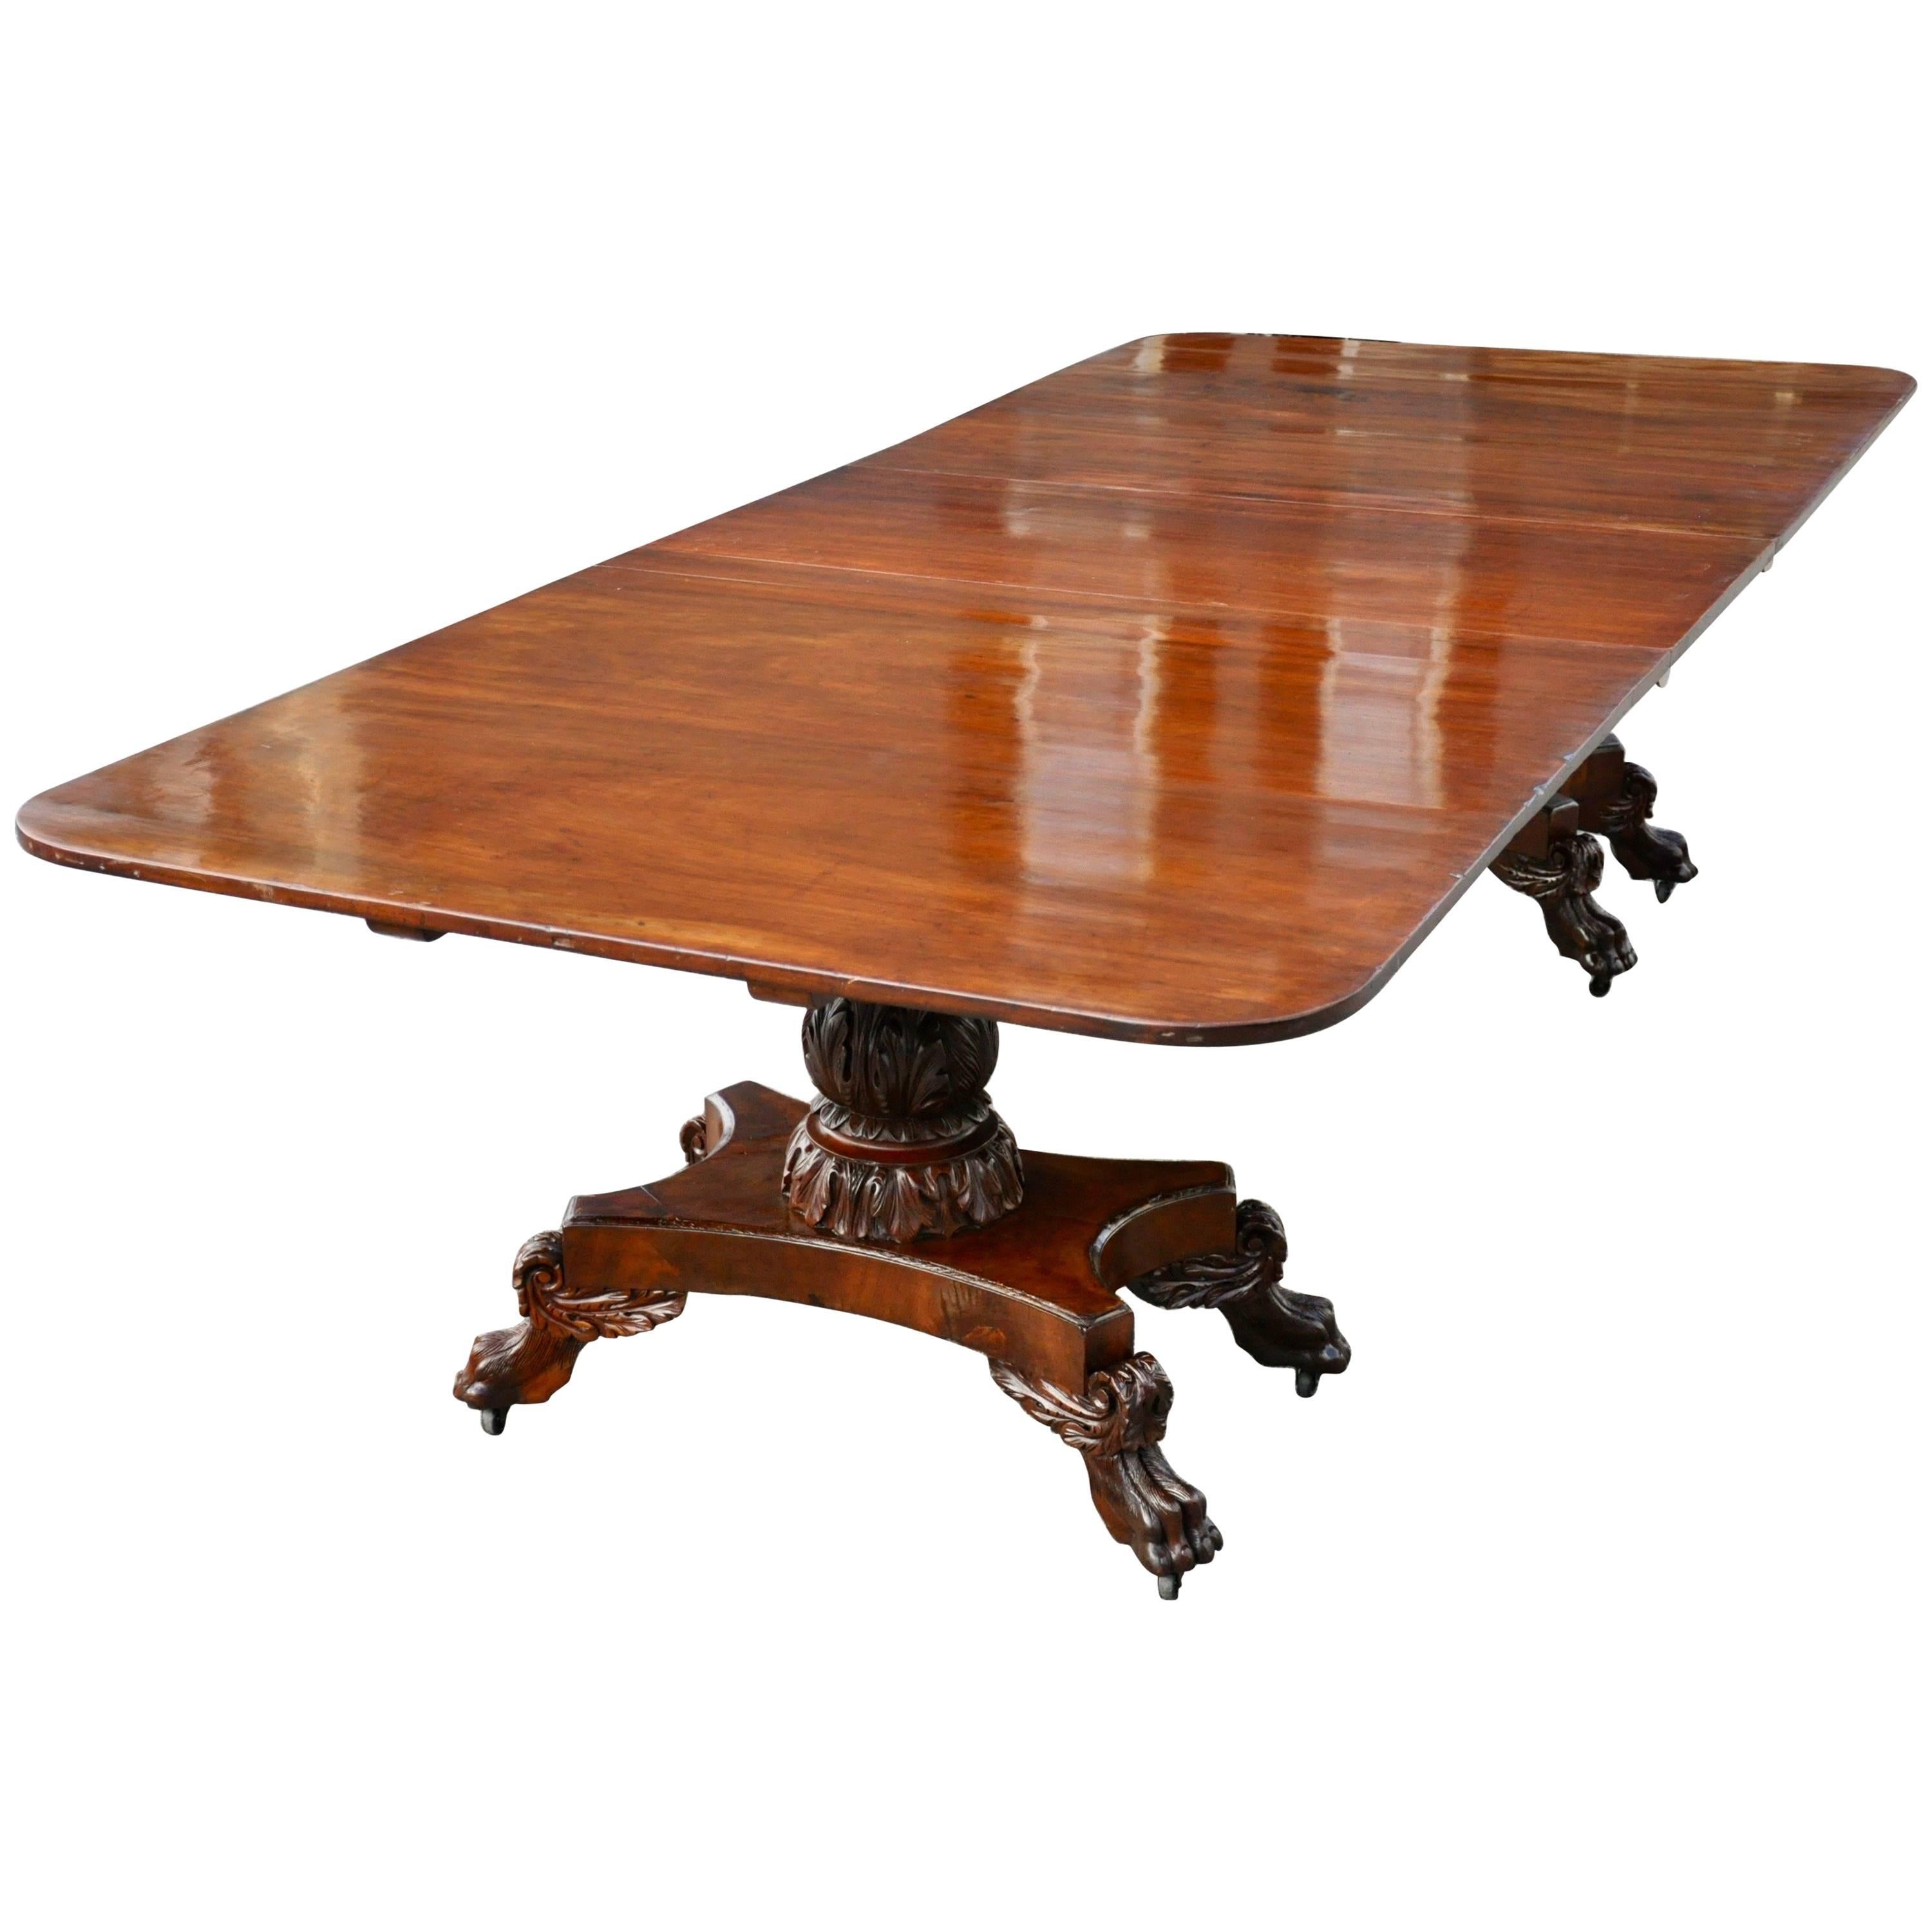 Period American Federal Dining Two-Pedestal Classical Table, circa 1820